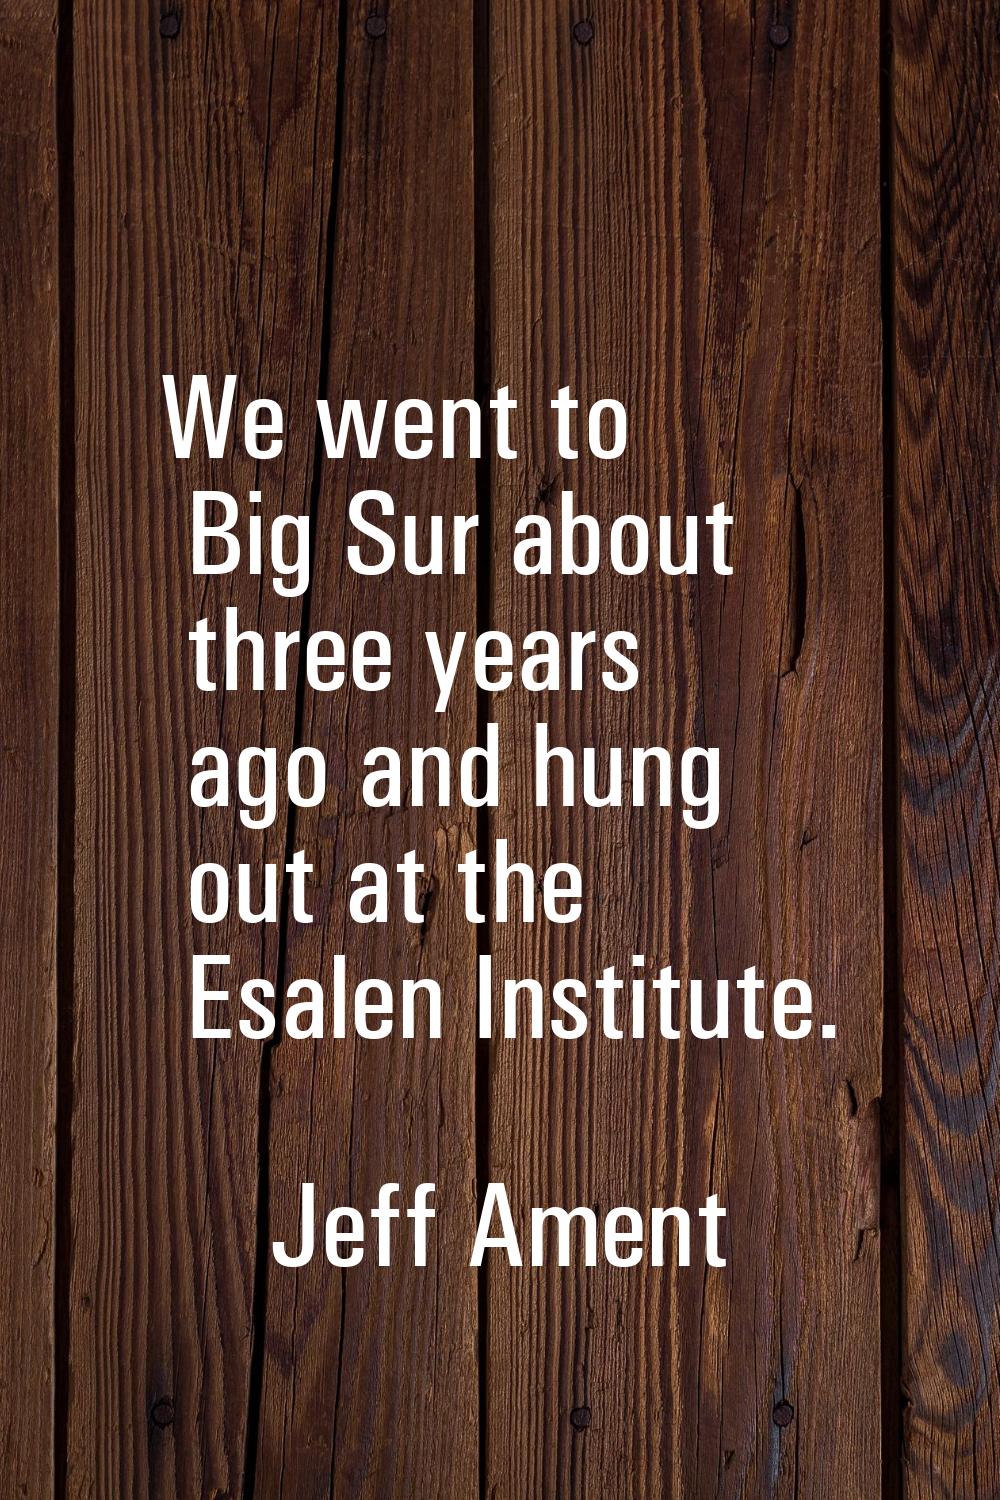 We went to Big Sur about three years ago and hung out at the Esalen Institute.